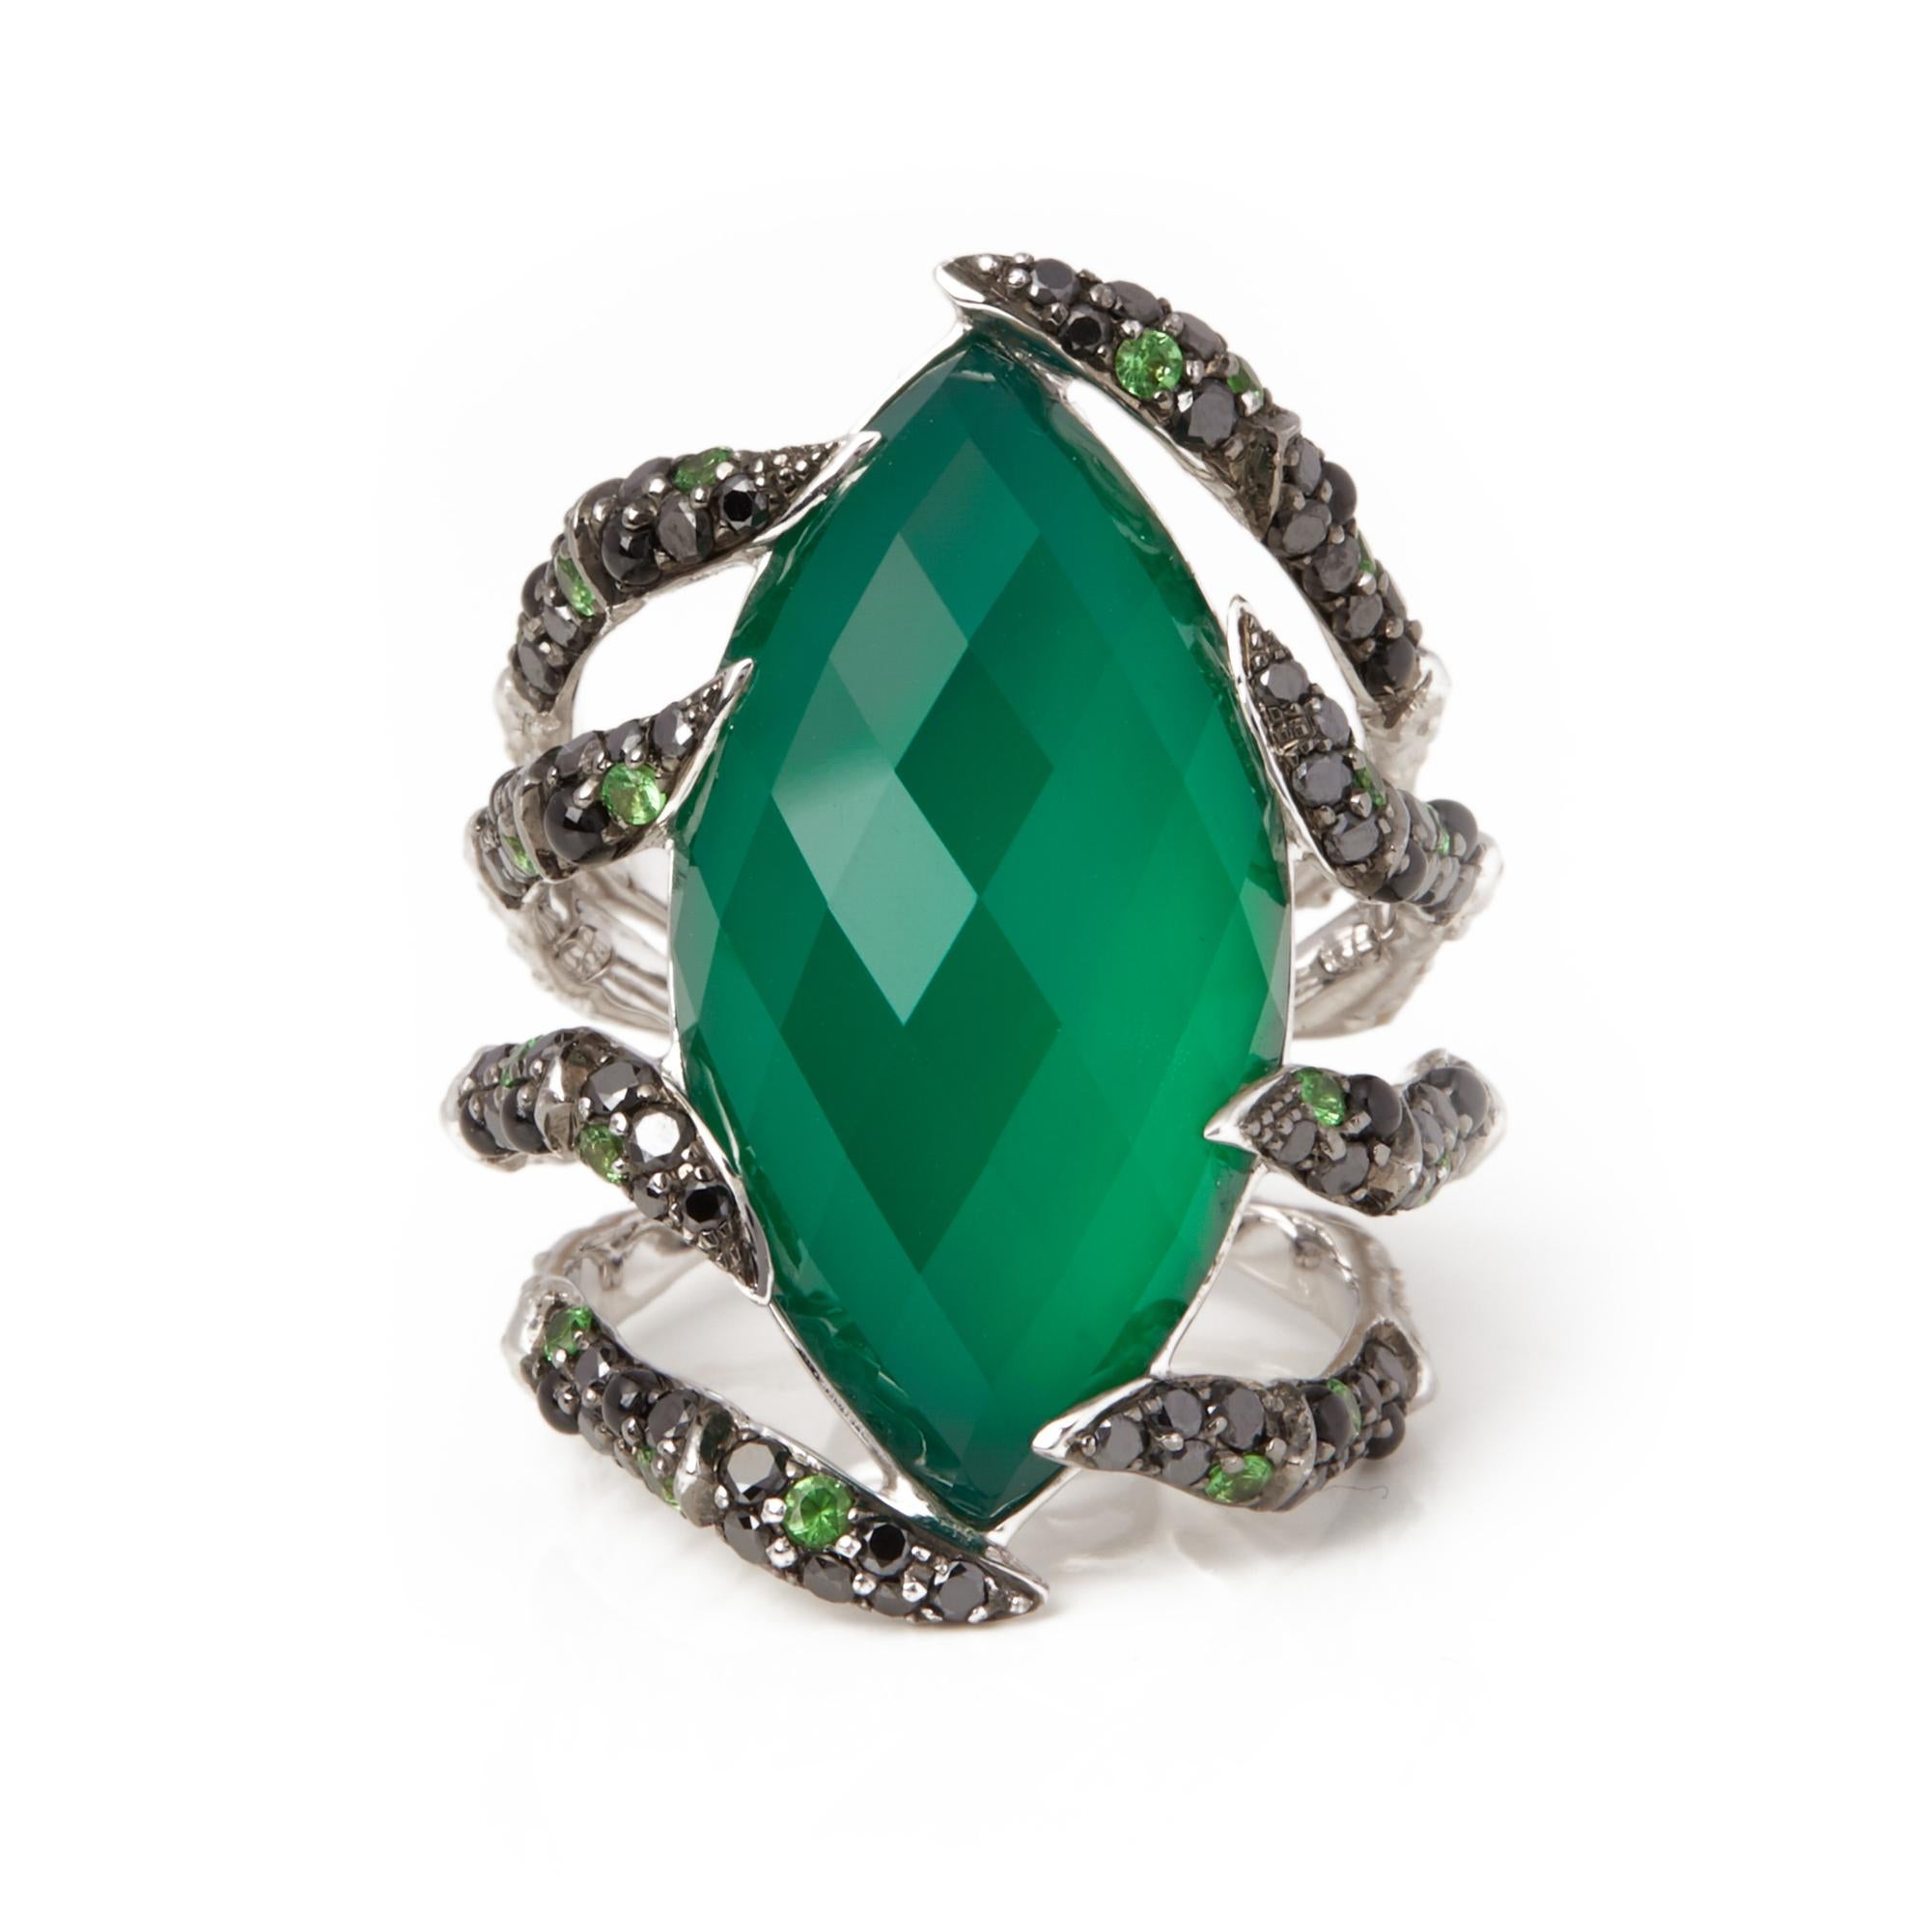 This ring by Stephen Webster is from his Jewels Verne collection and features a green agate Crystal Haze stone complemeted by black diamond and tsavorite stones. Set in white gold with a signature band. Complete with Xupes presentation box. Our